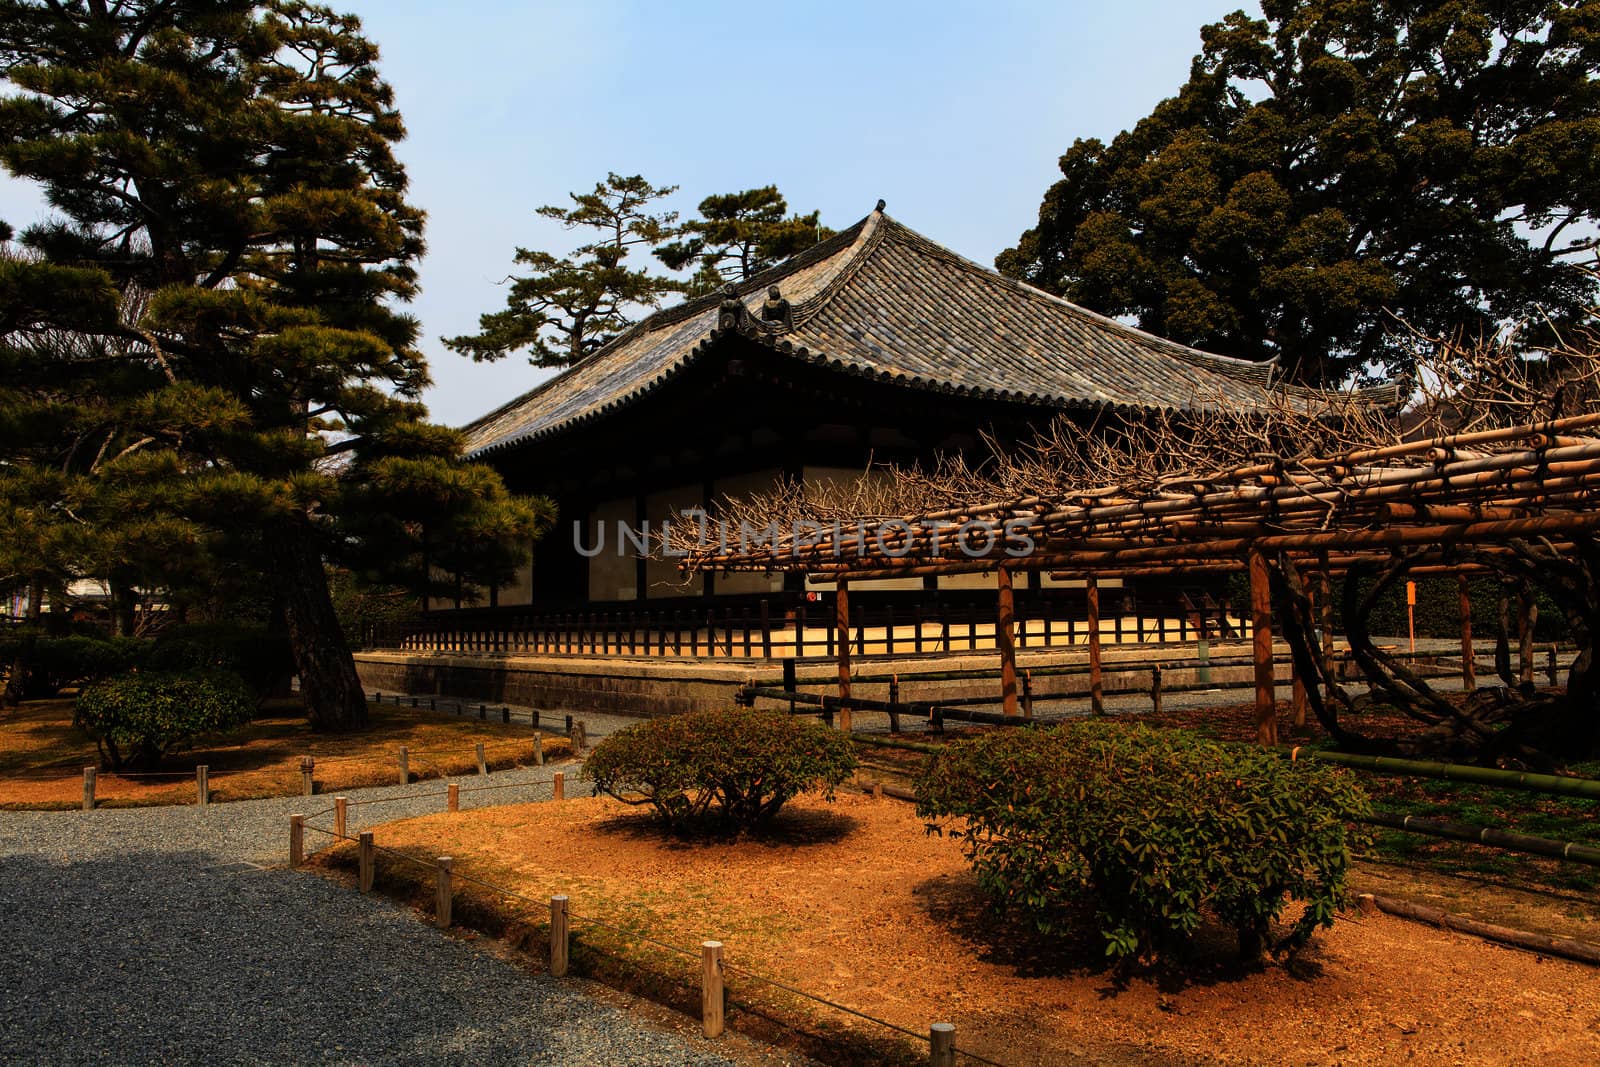 Uji, Kyoto, Japan - famous Byodo-in Buddhist temple, a UNESCO World Heritage Site. Phoenix Hall building.